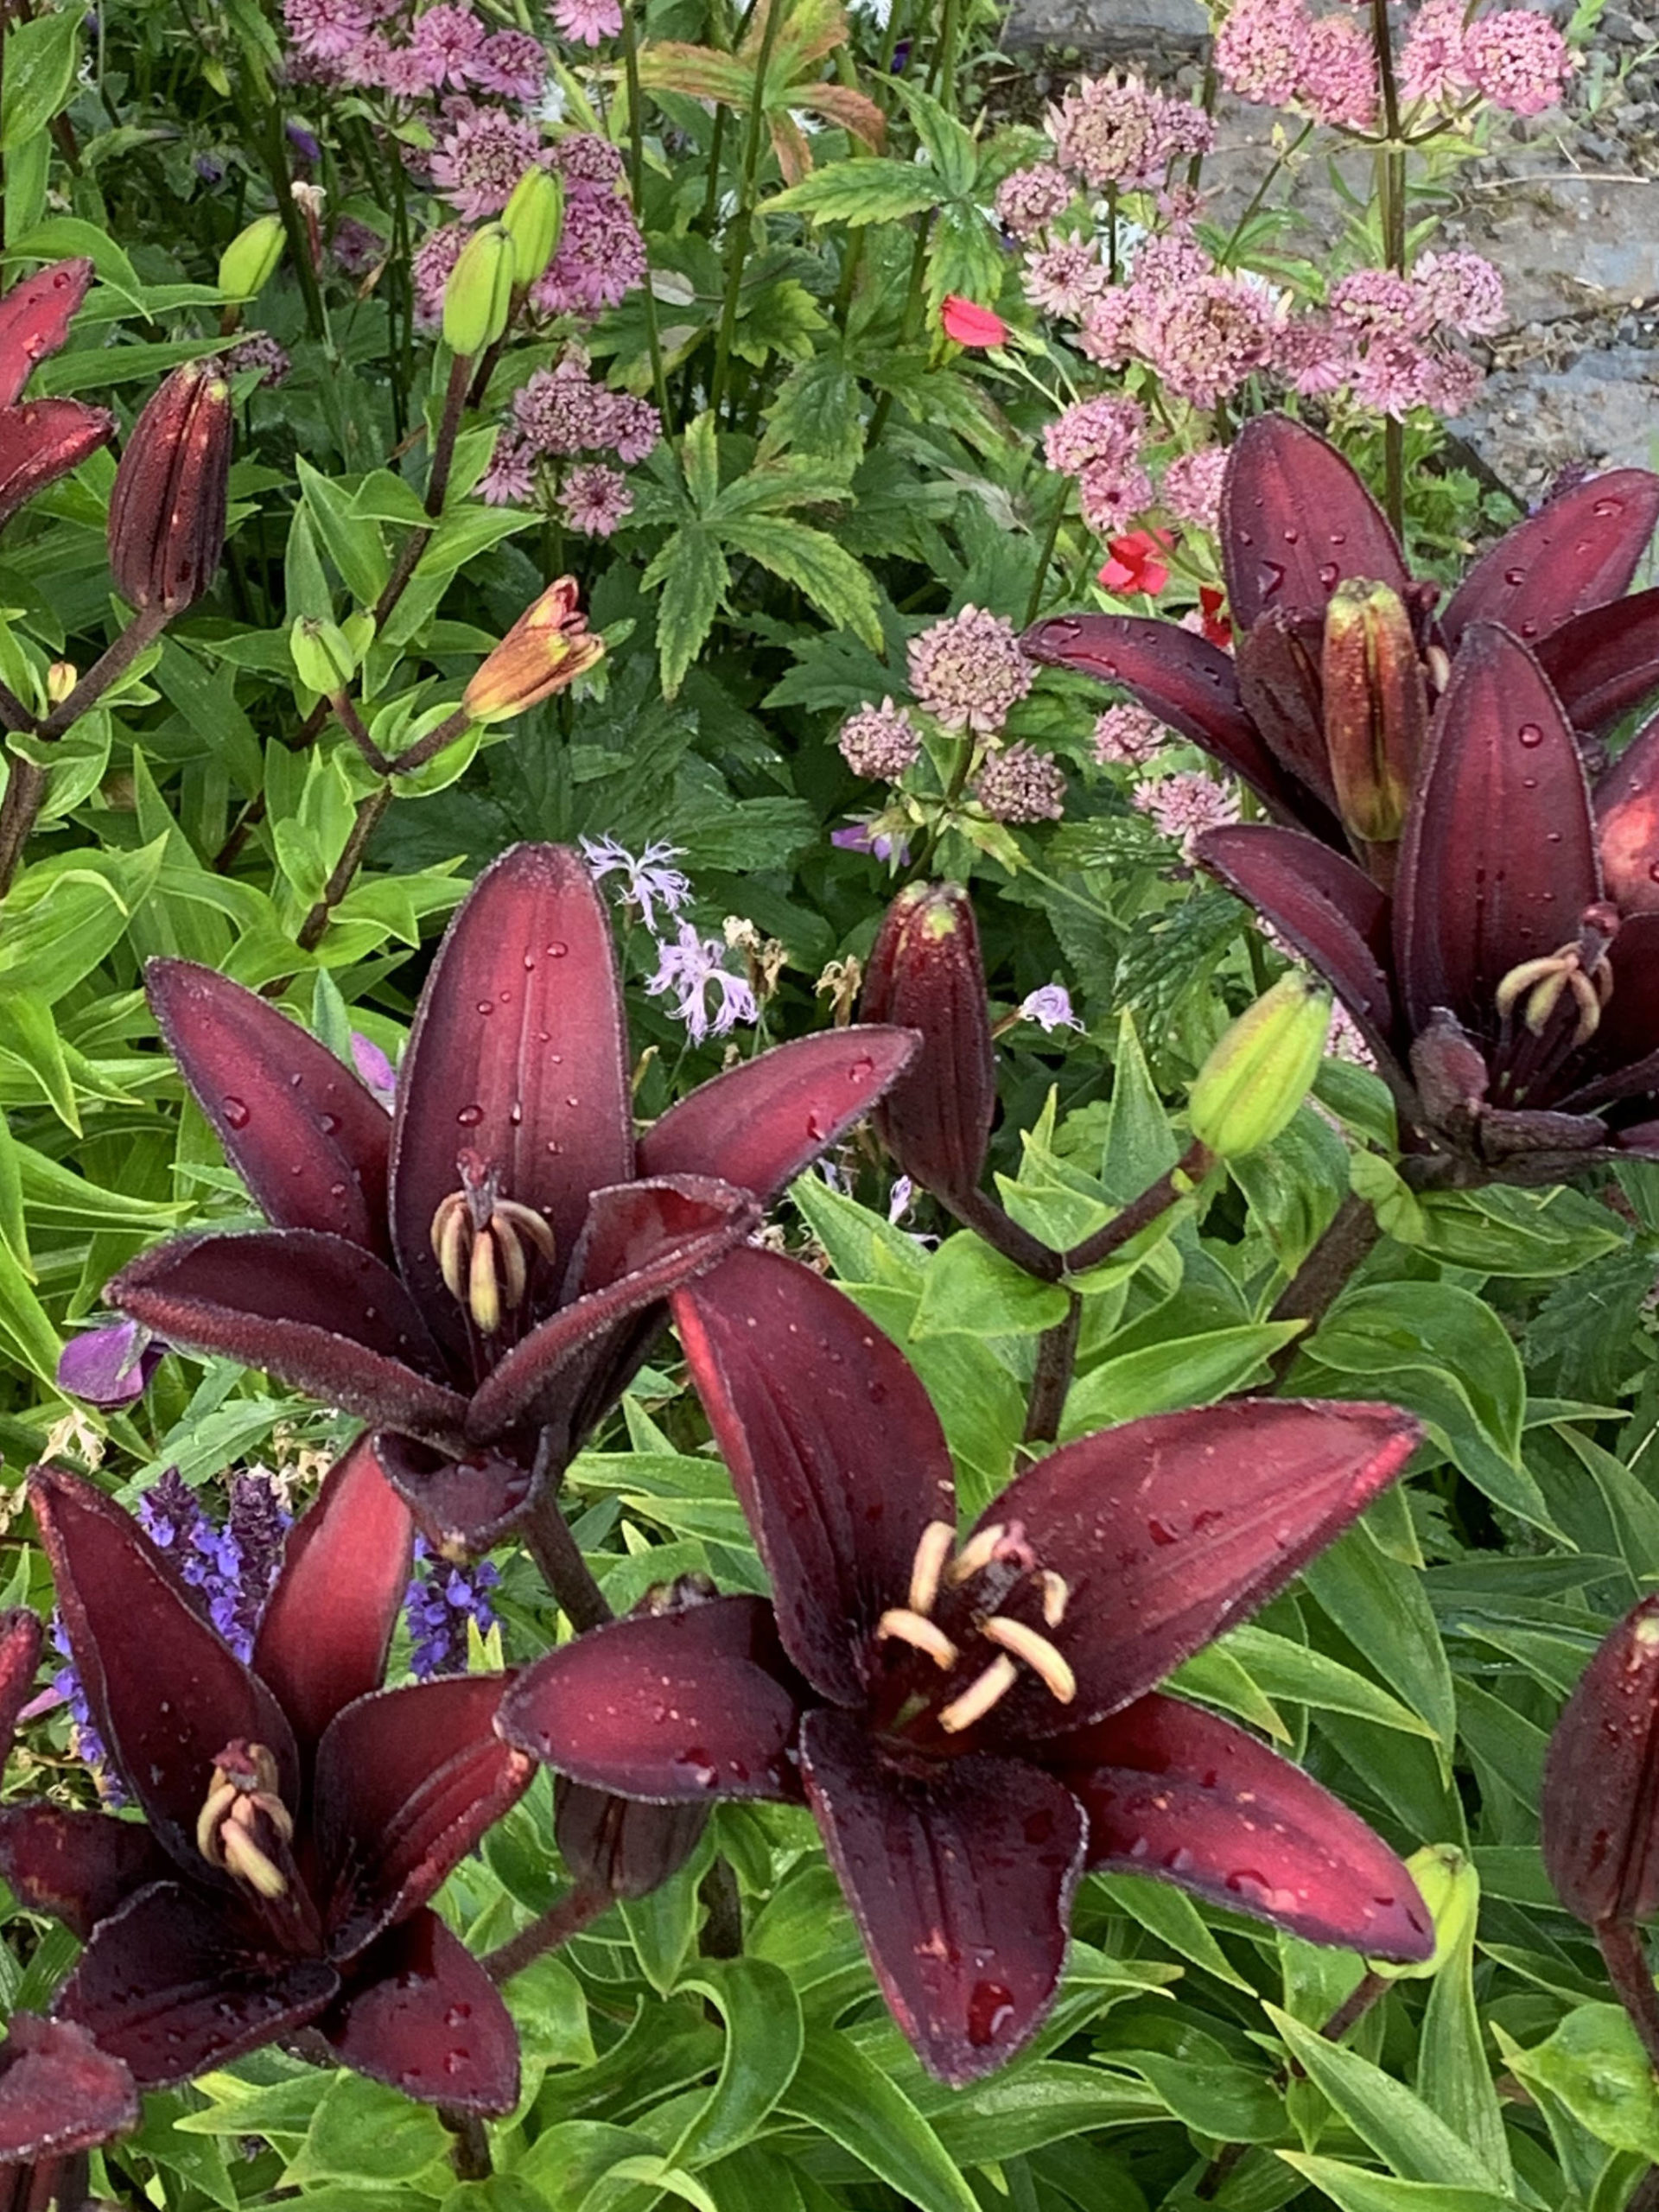 Lilies and astrantia bloom on Aug. 14, 2020, in the Kachemak Gardener’s garden in Homer, Alaska. (Photo by Rosemary Fitzpatrick)